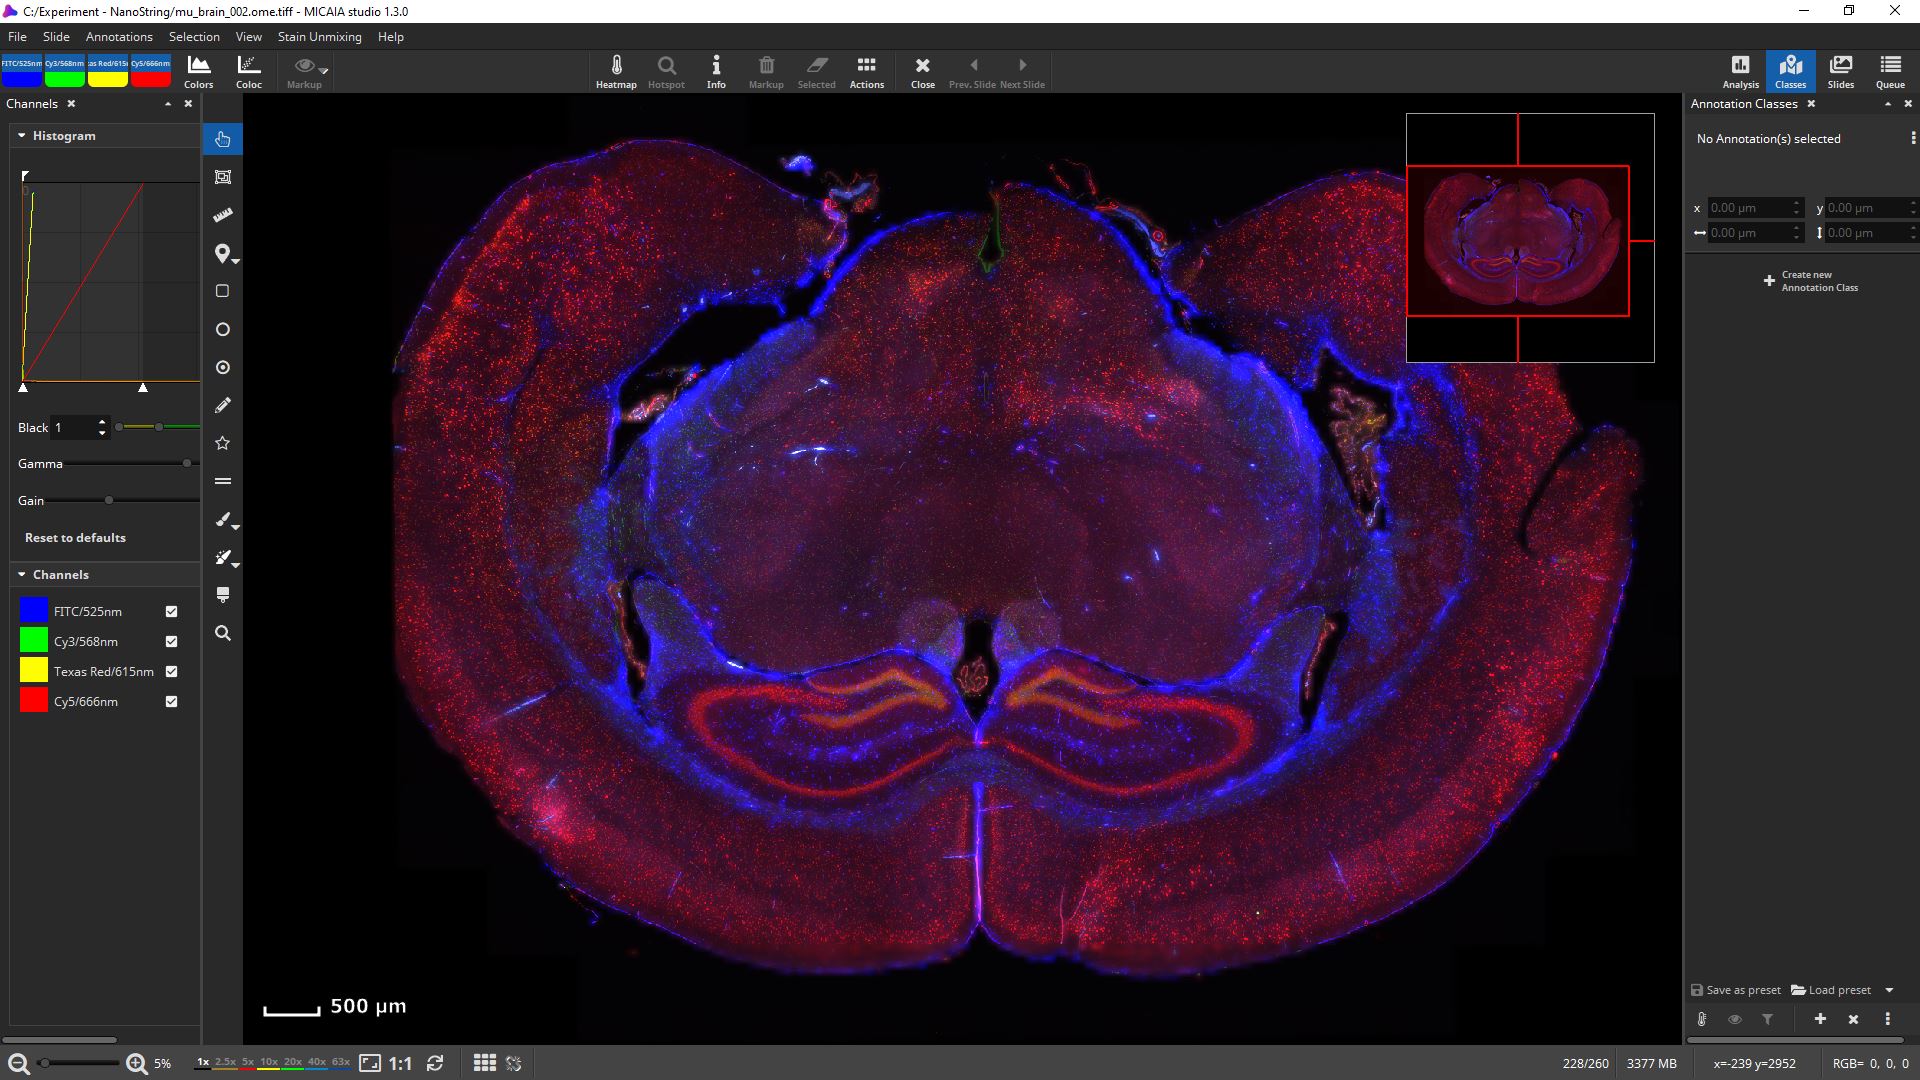 "Mouse Brain" scanned with NanoString GeoMx DSP (slide copyright @ NanoString) 